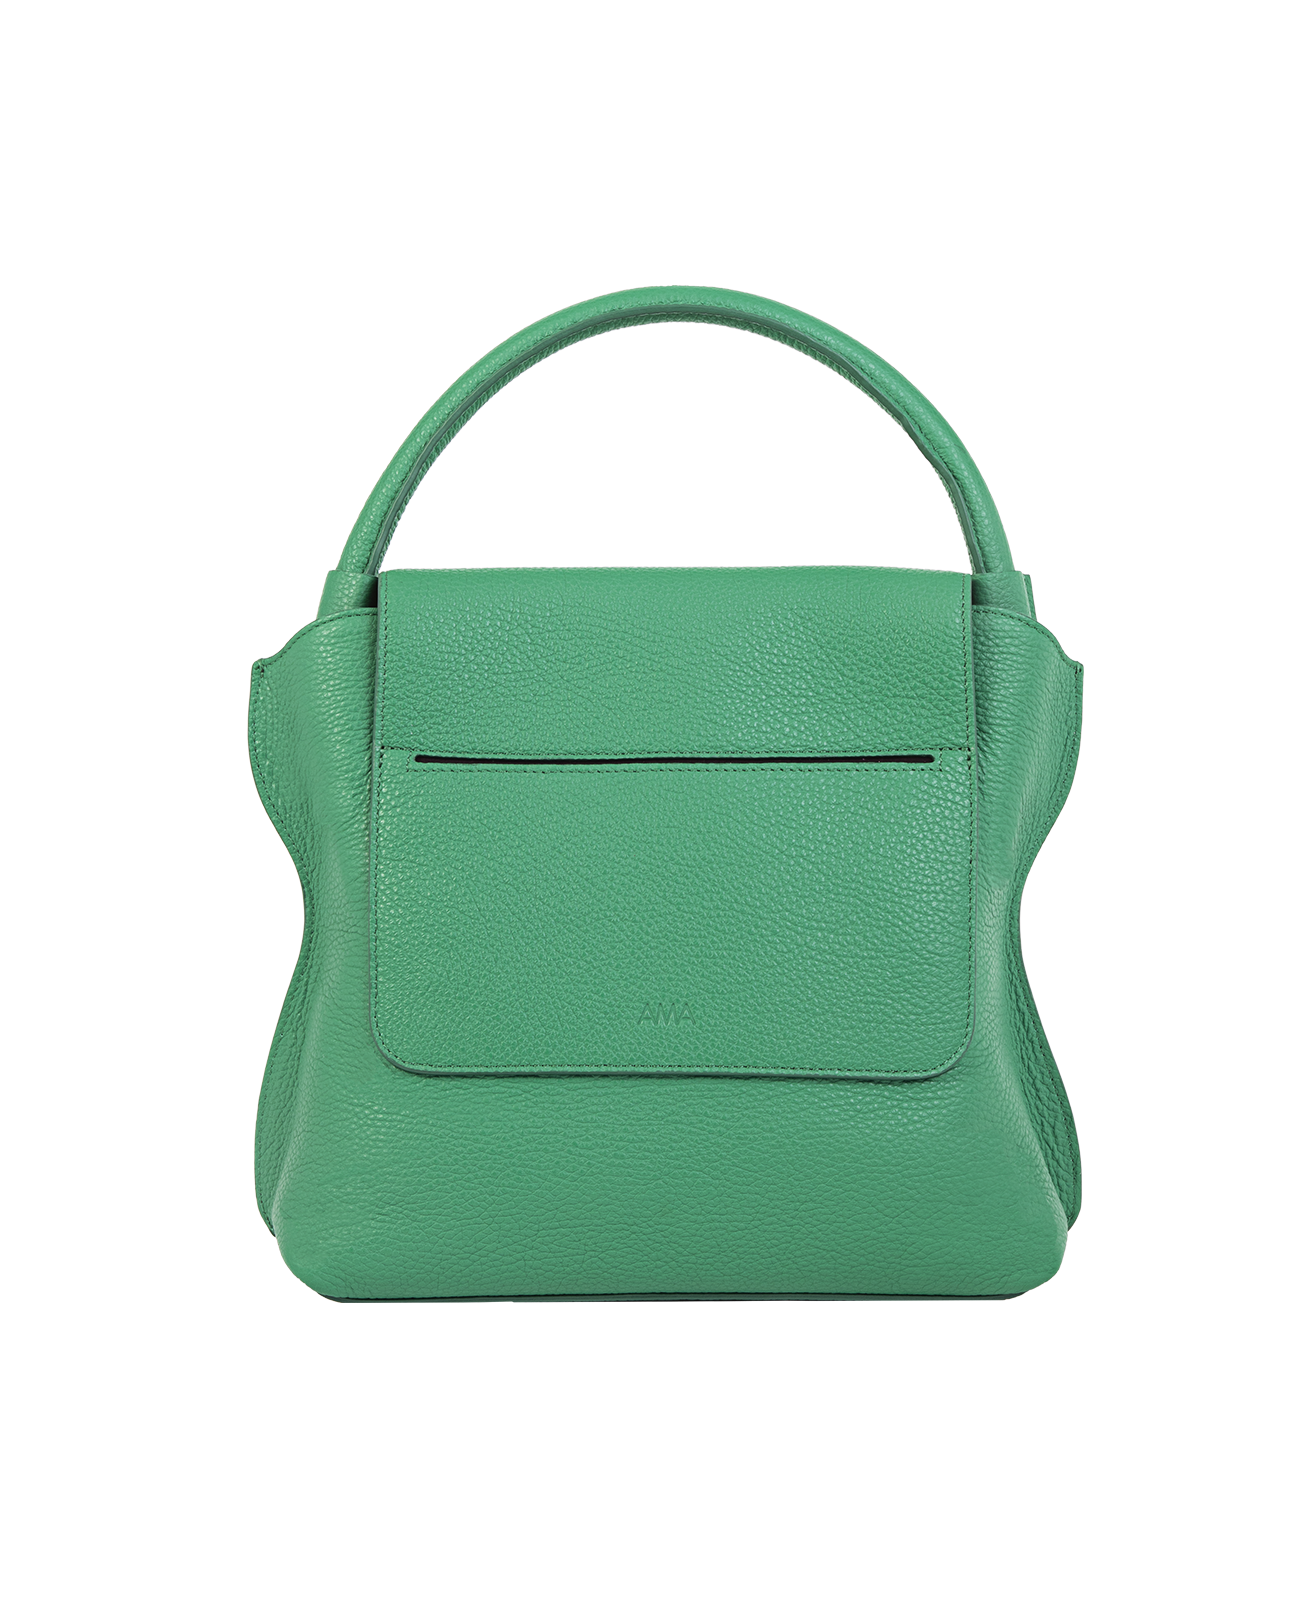 Cross-body bag in Italian full-grain leather, semi-aniline calf Italian leather with detachable shoulder strap.Three compartments, zip pocket in the back compartment. Magnetic flap closure with logo. Color: Green. Size:Large